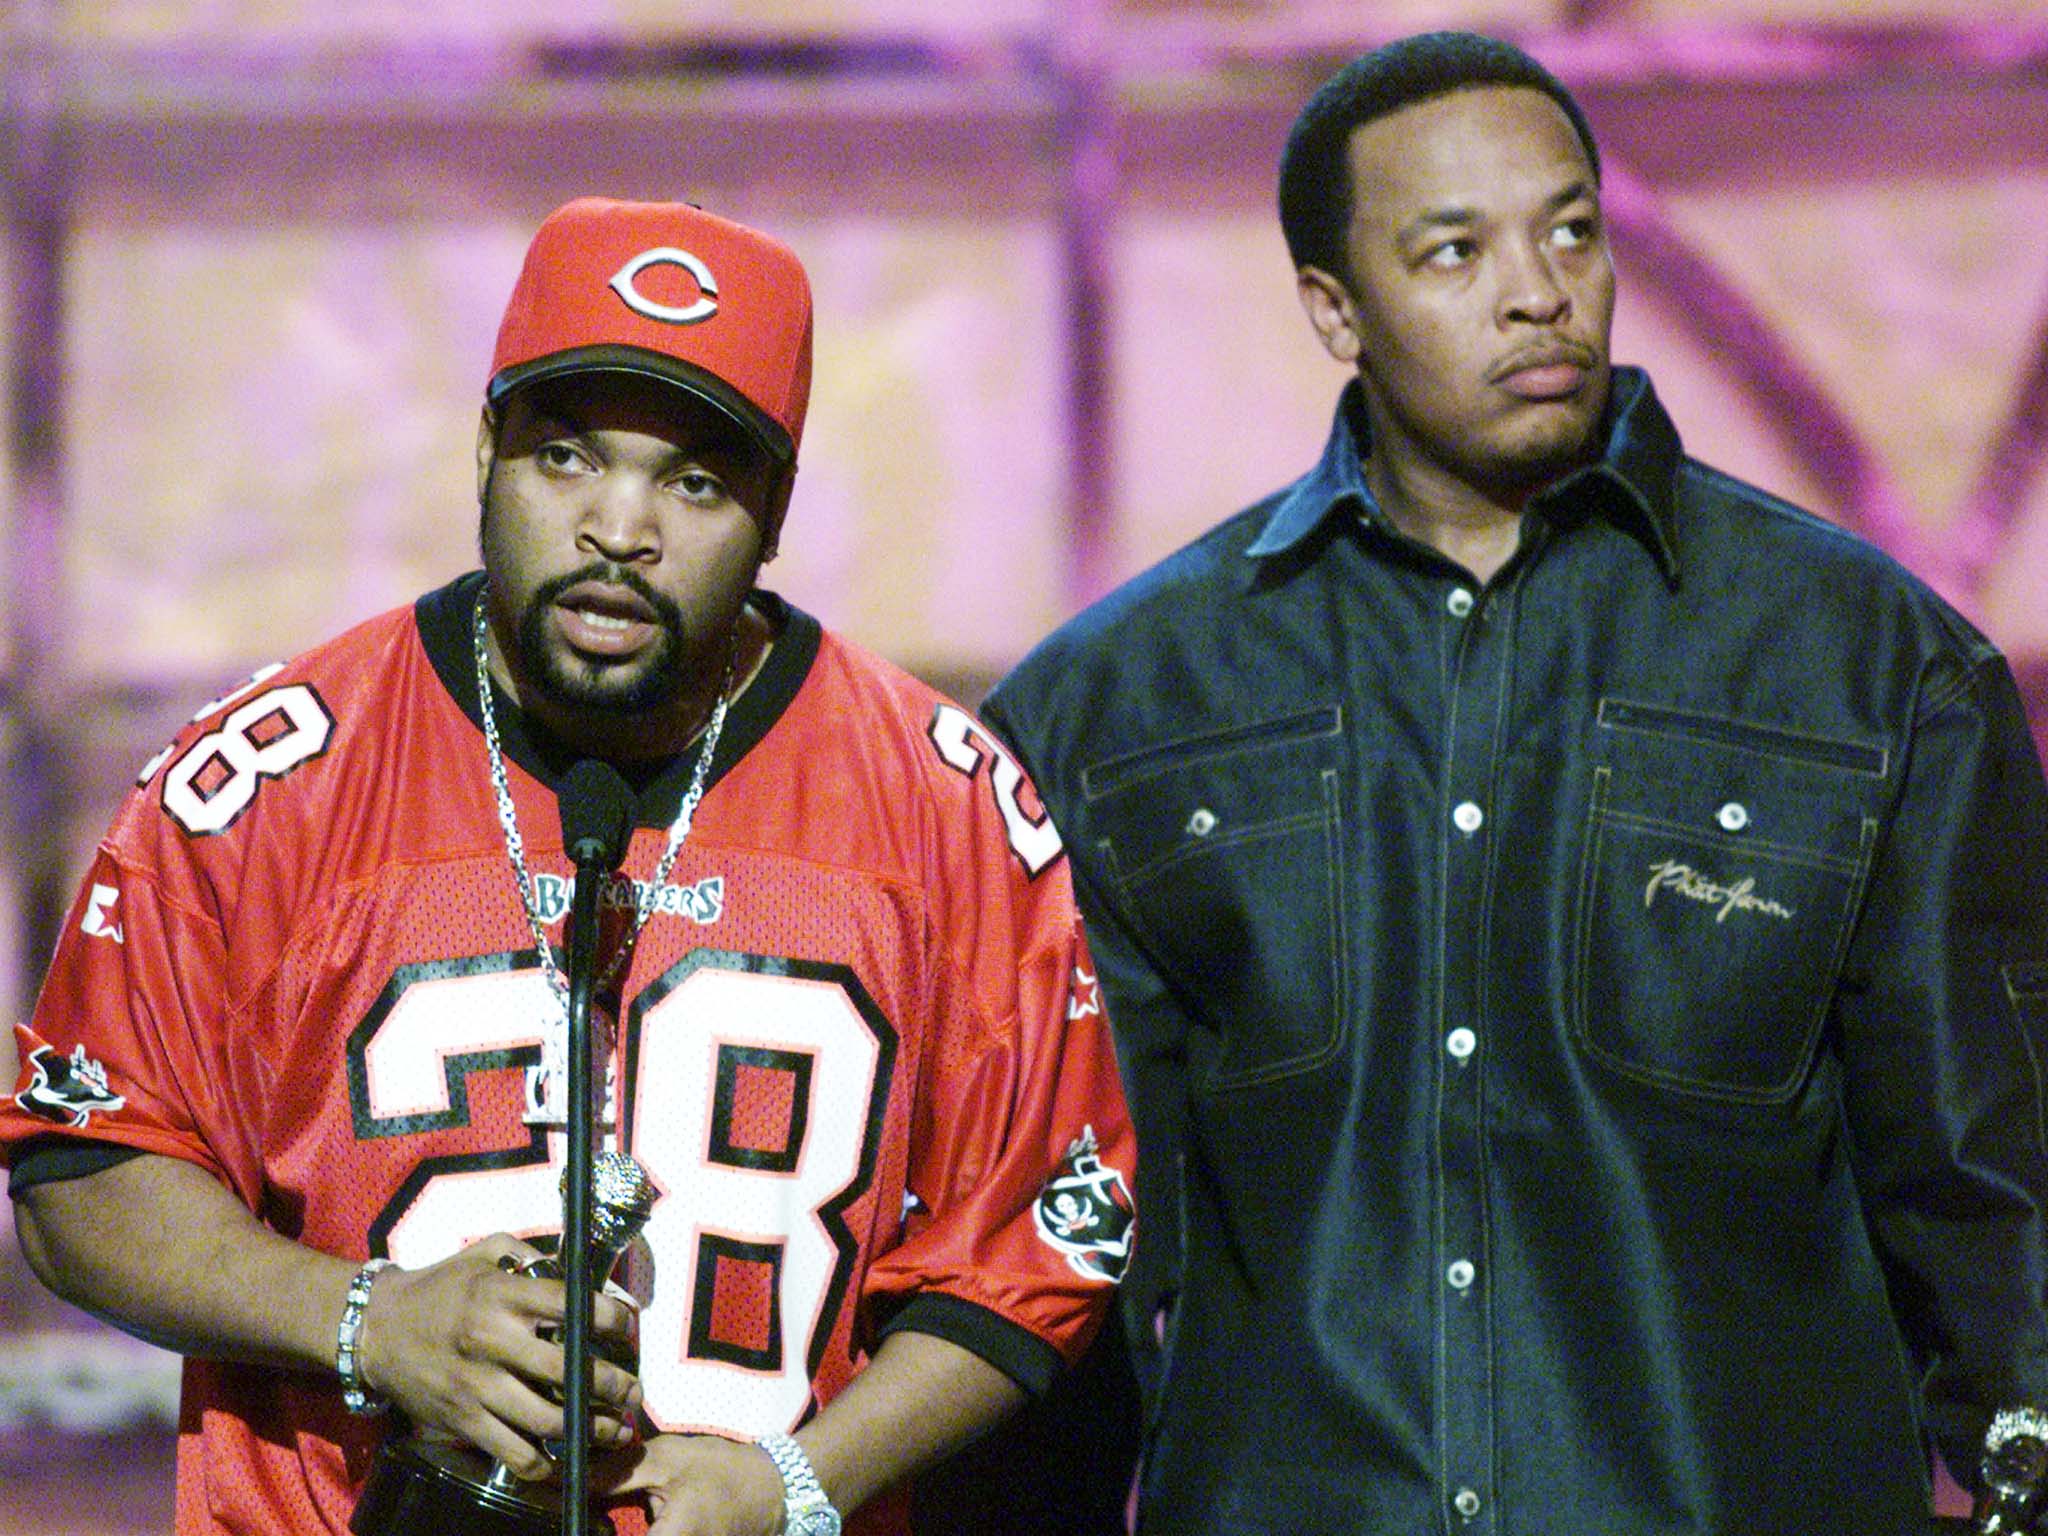 Ice Cube Denies Taking Part In 'Secret Meeting' That Changed Hip Hop, News